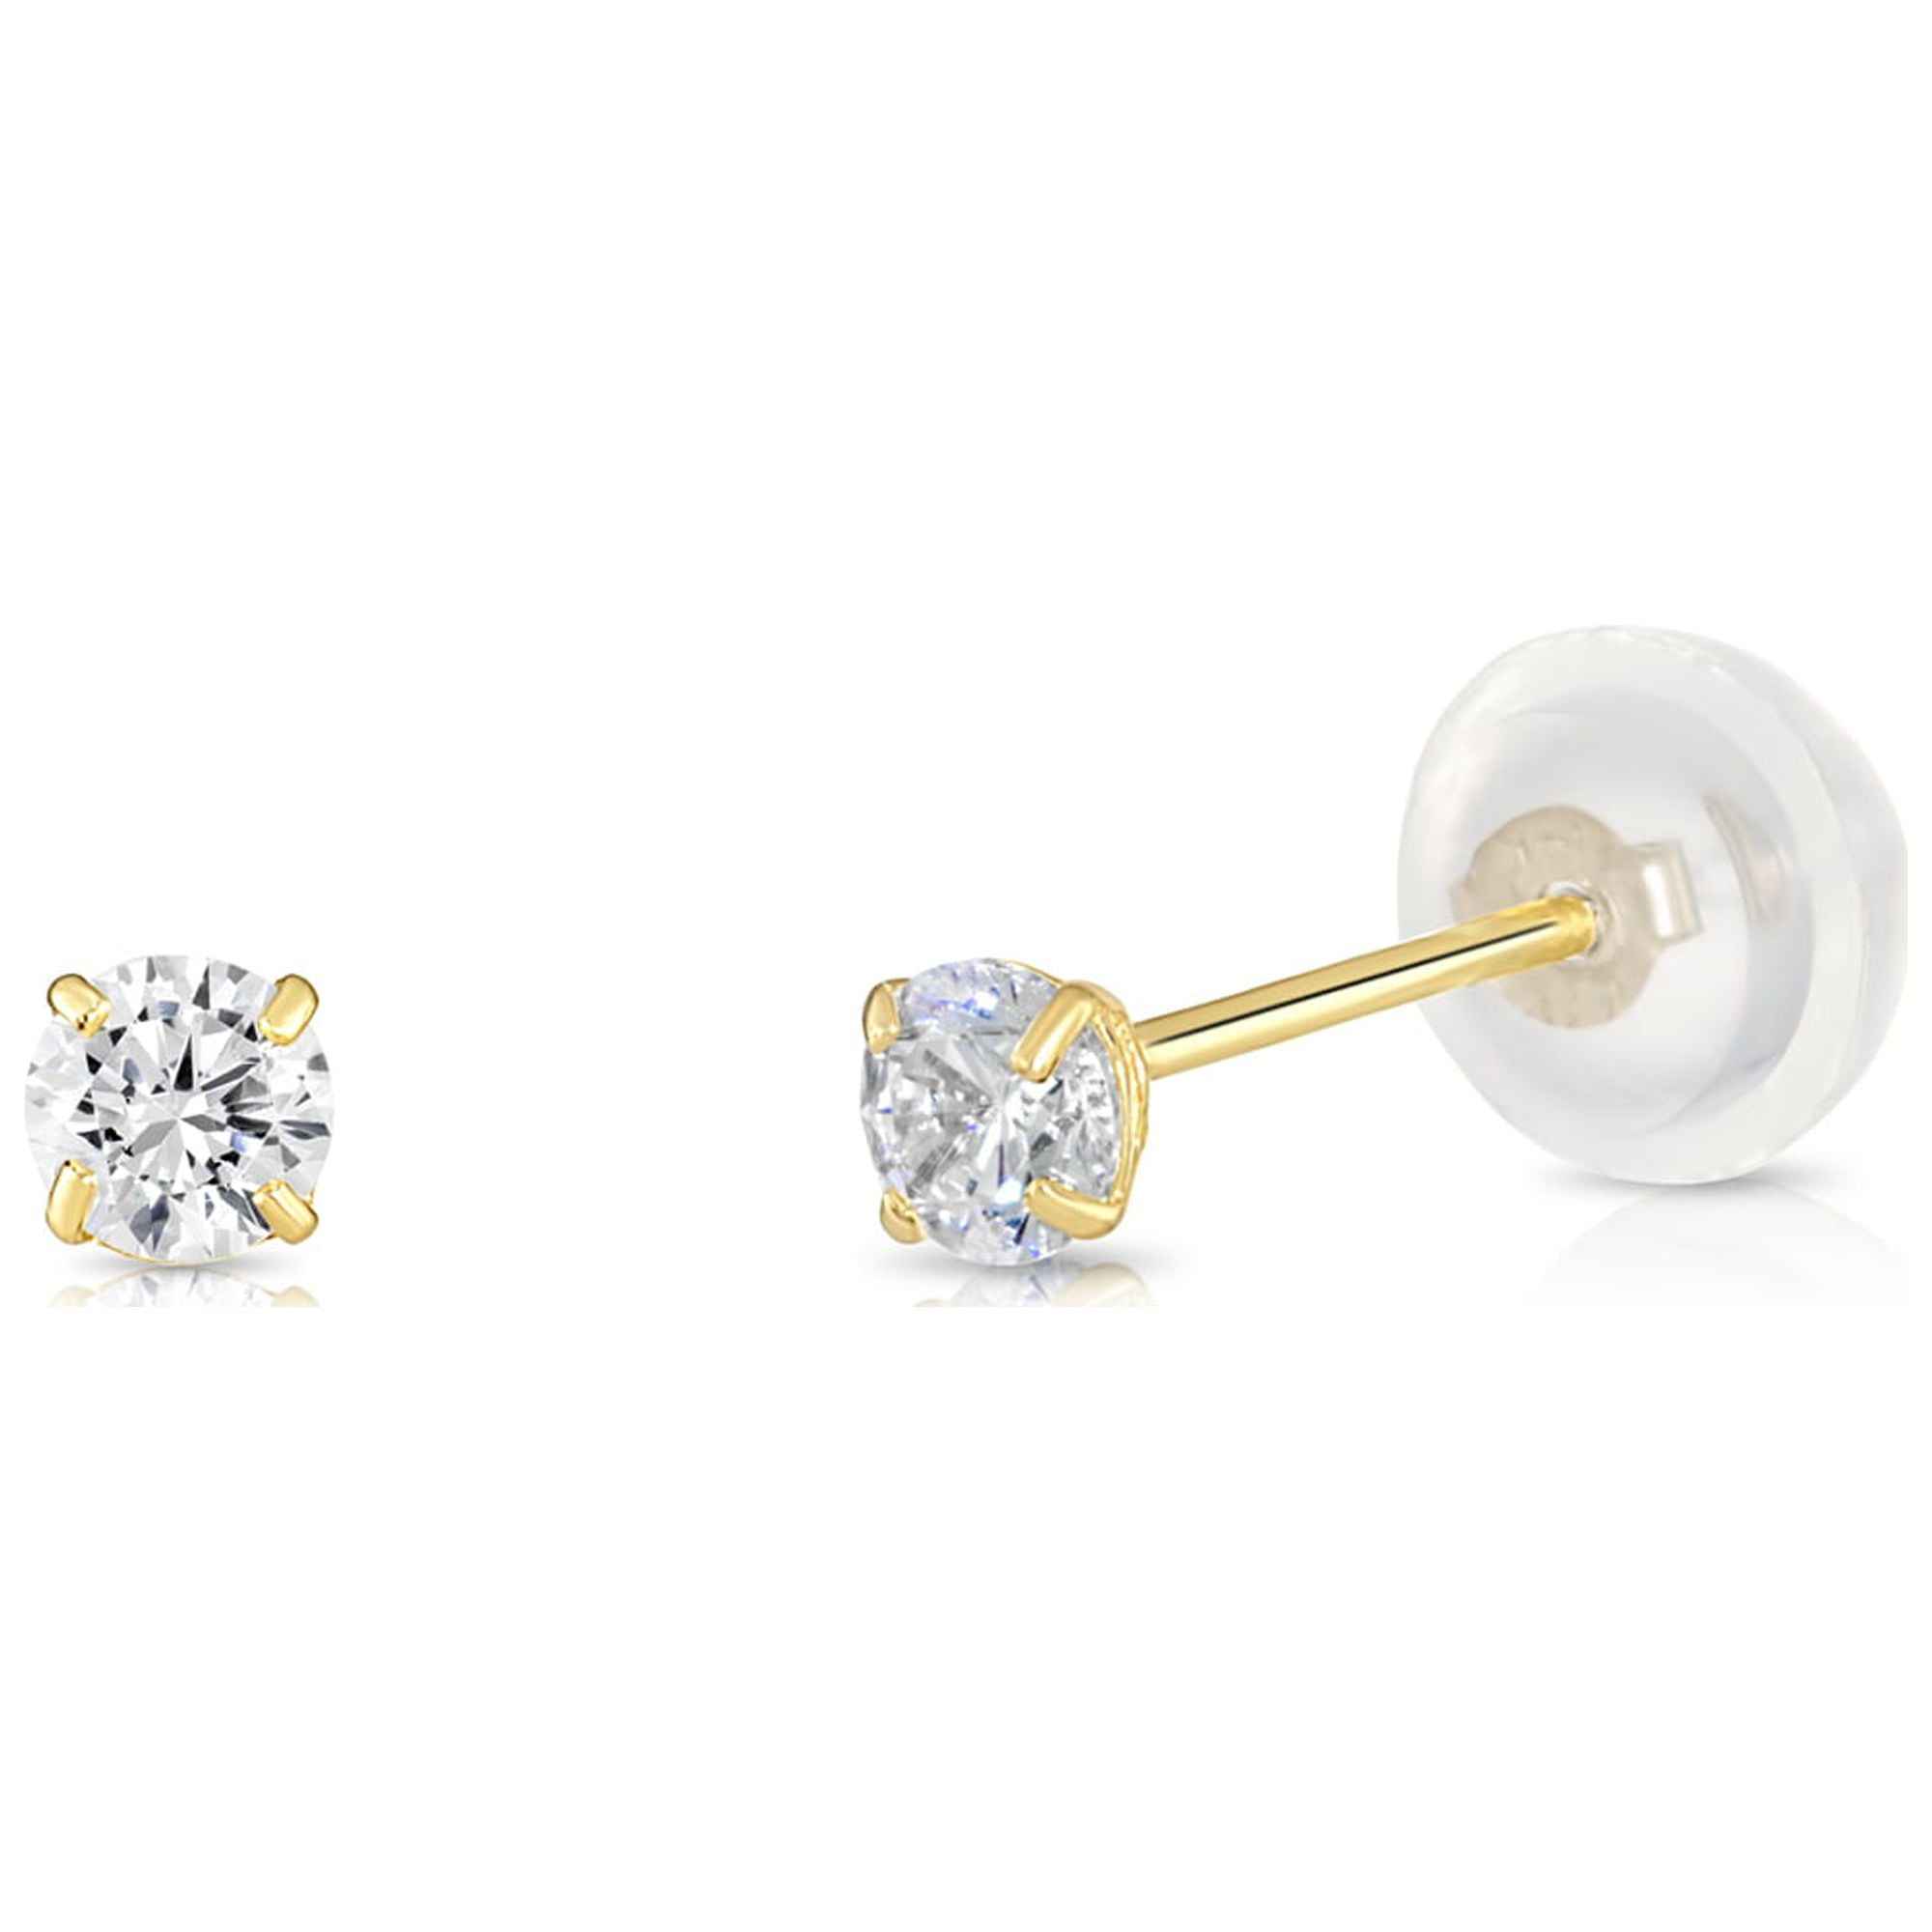 DORO KIMI 14k real solid Yellow Gold white cz Stud chunky Earrings for  women Cubic Zirconia with 14k gold silicone earring flat backs